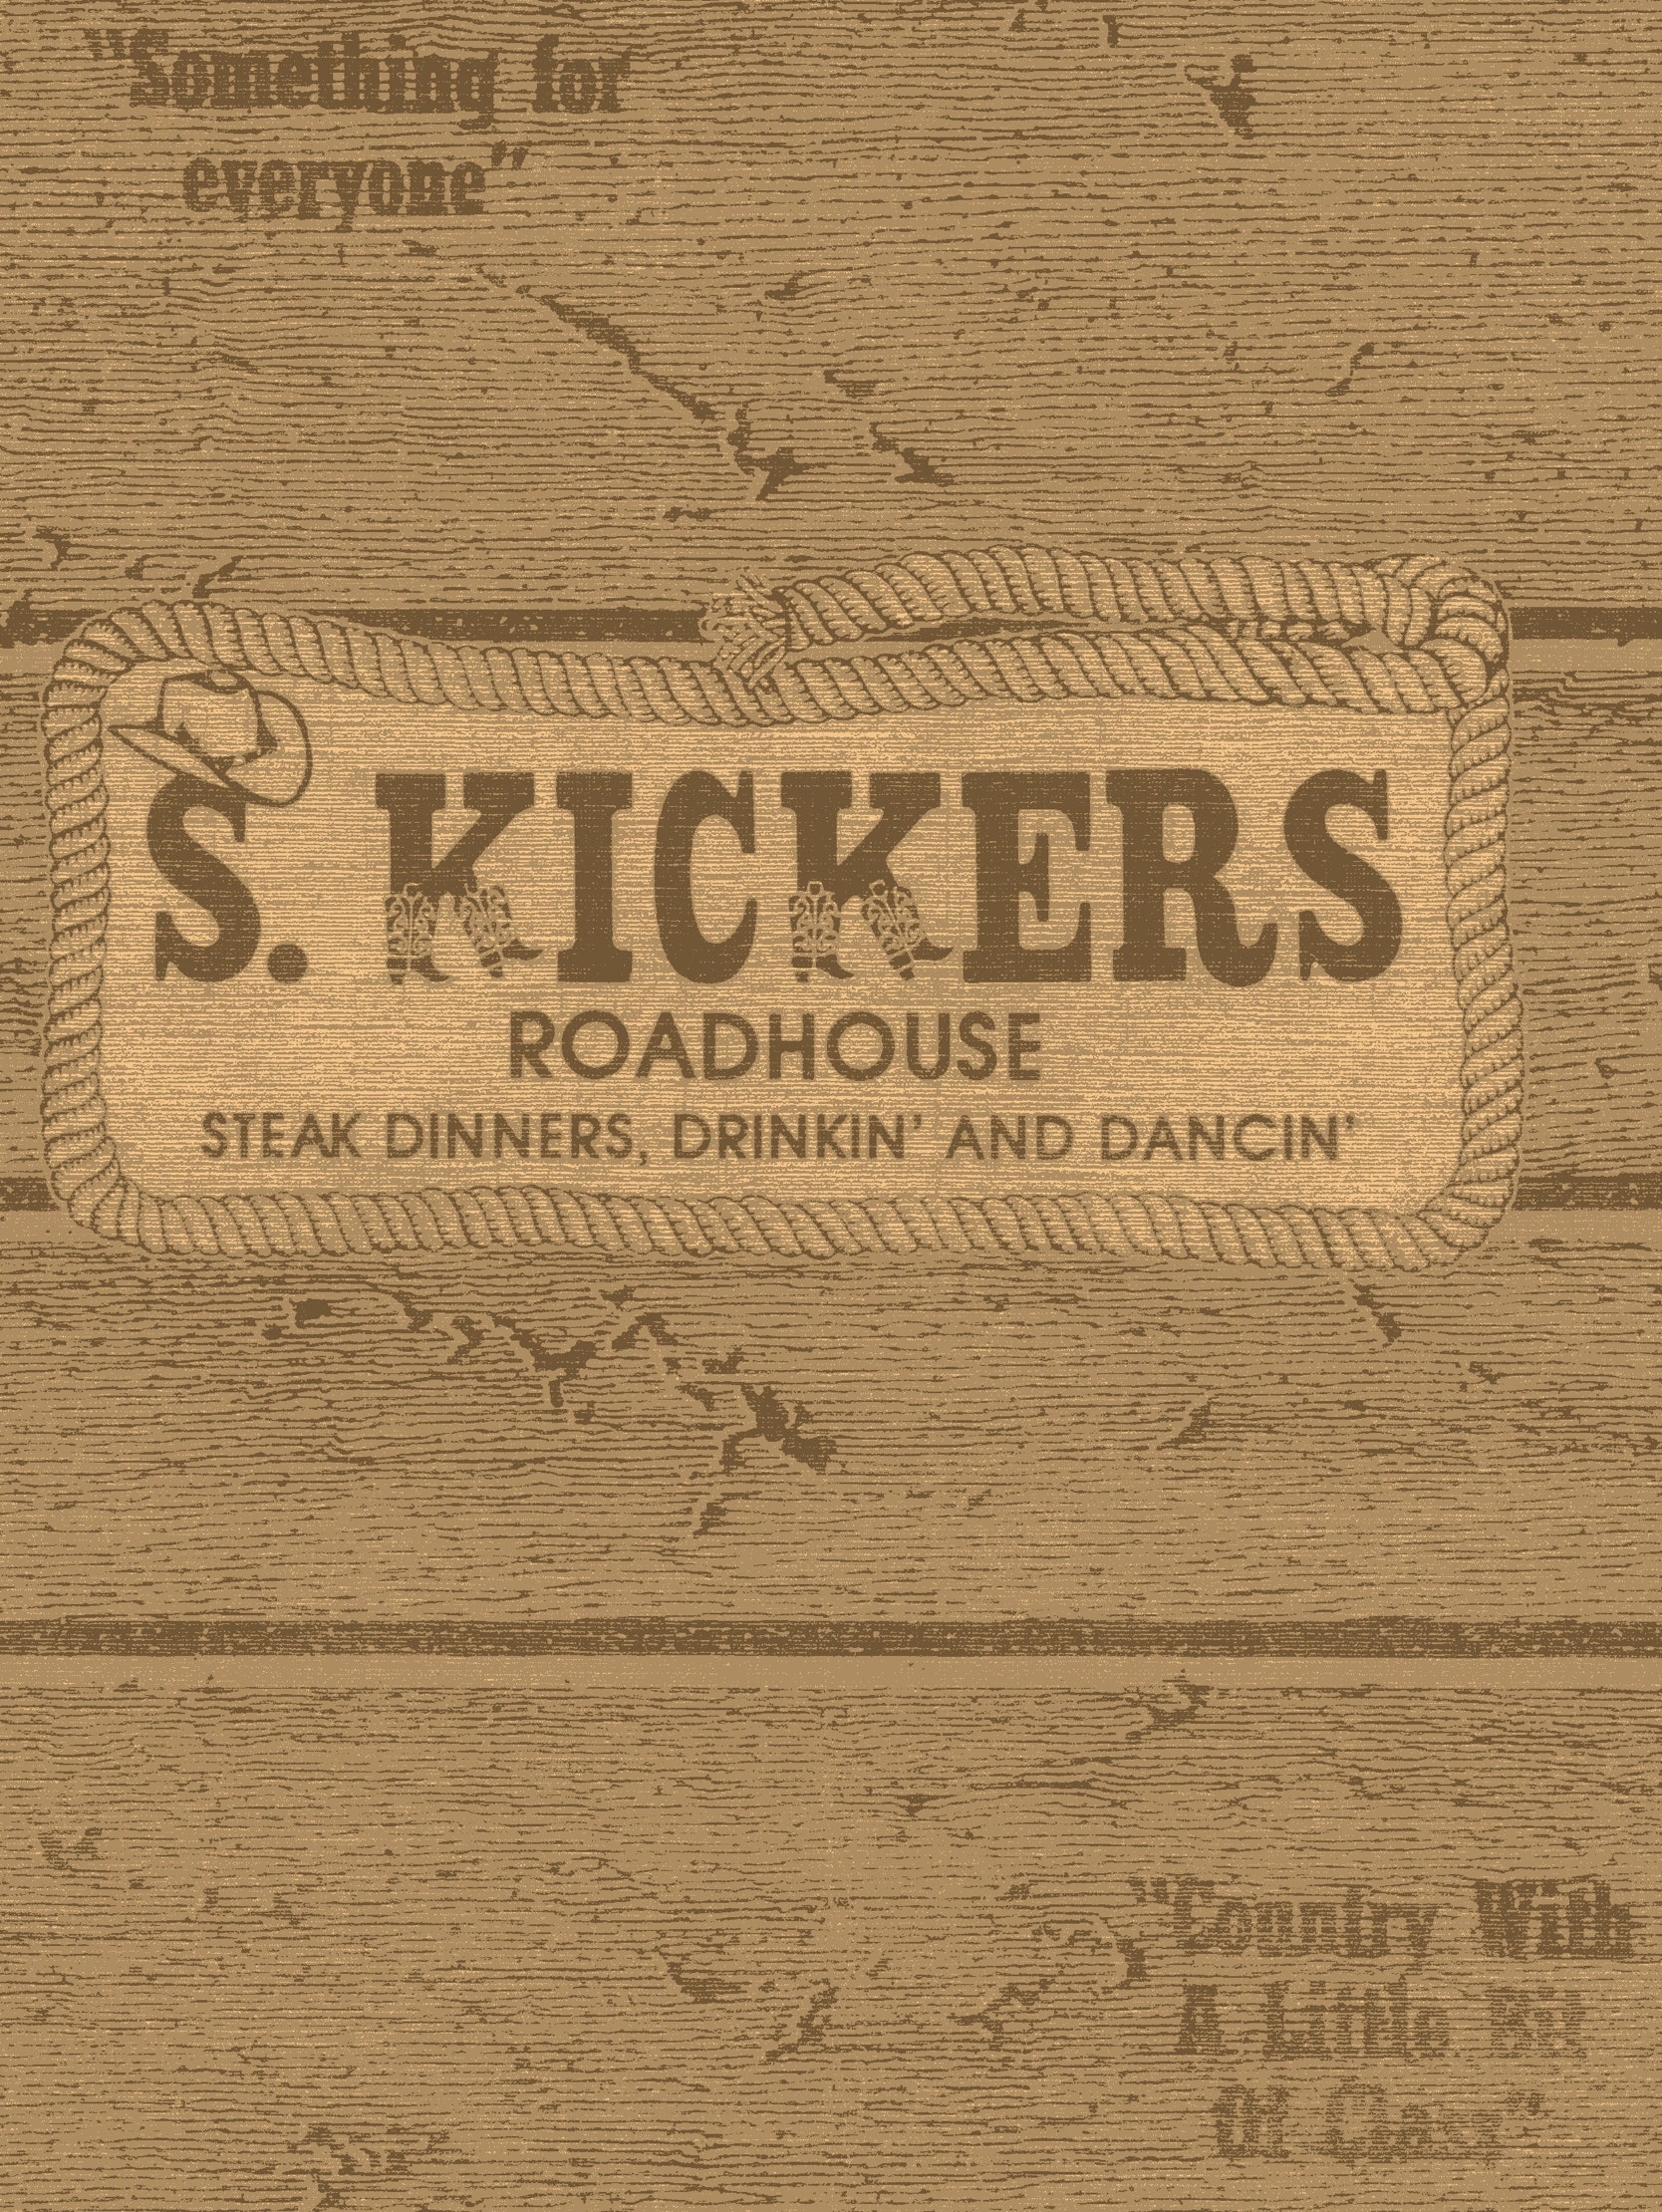 Menu cover from the S.Kickers Steak House in Utica, New York, 1983, collected when the Baked Apple Band performed there with Ryan Thomson as fiddler, image 1 of 2.